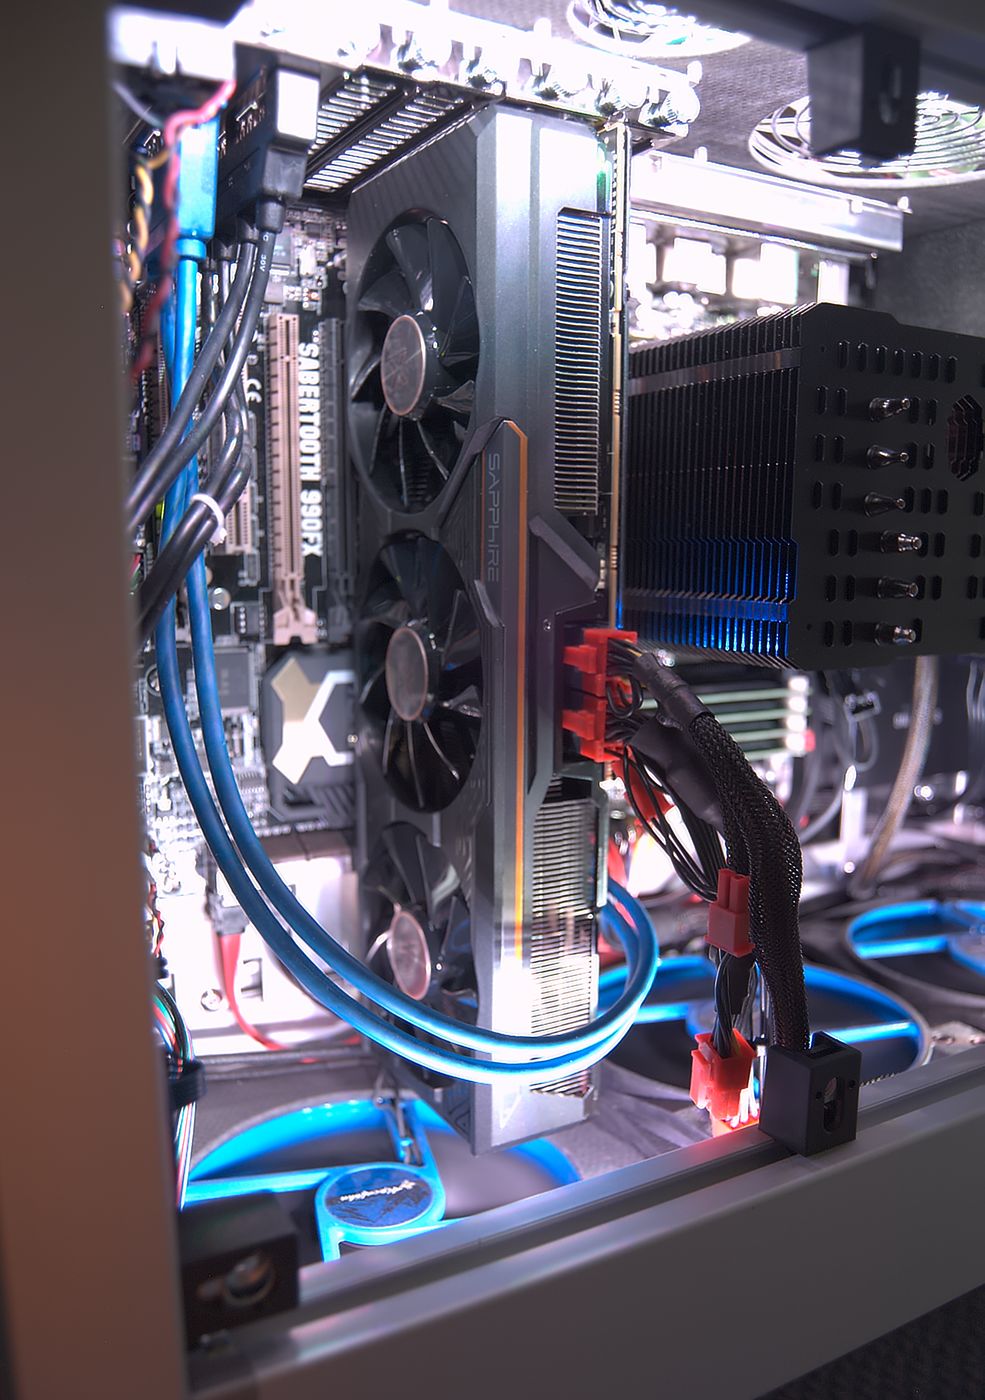 Close-up of the graphics card, which spans the full height of the case and has three fans.